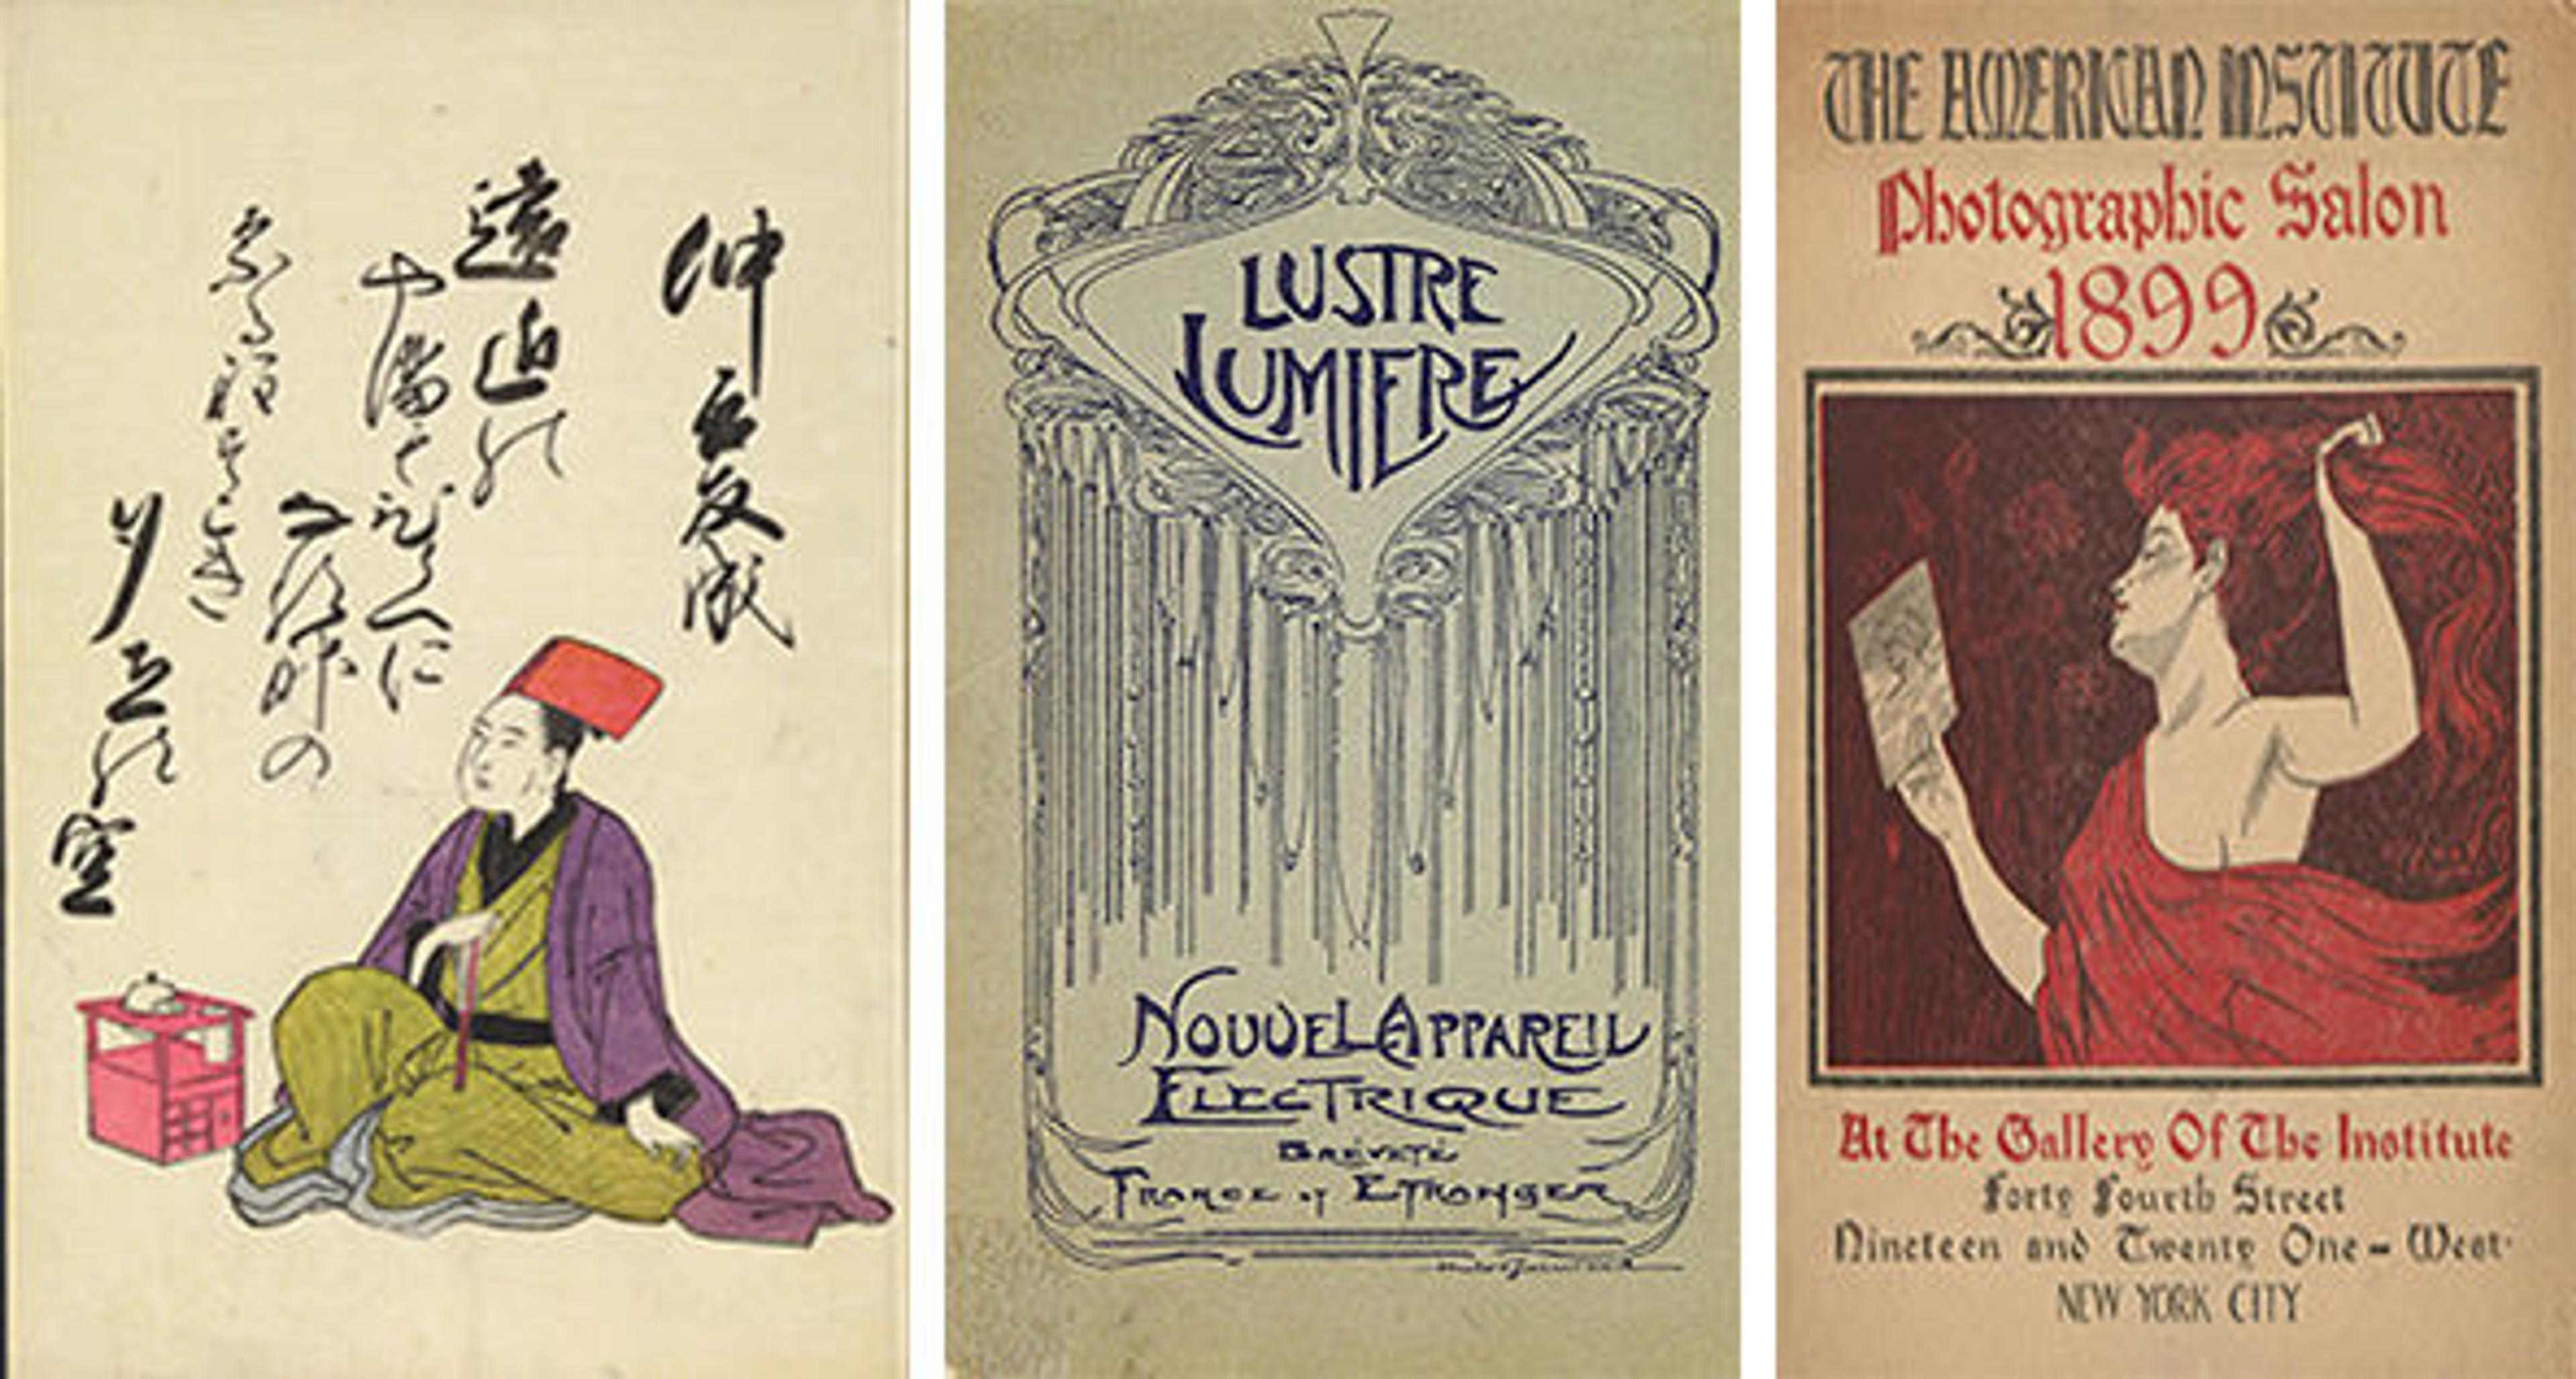 Digital collections covers